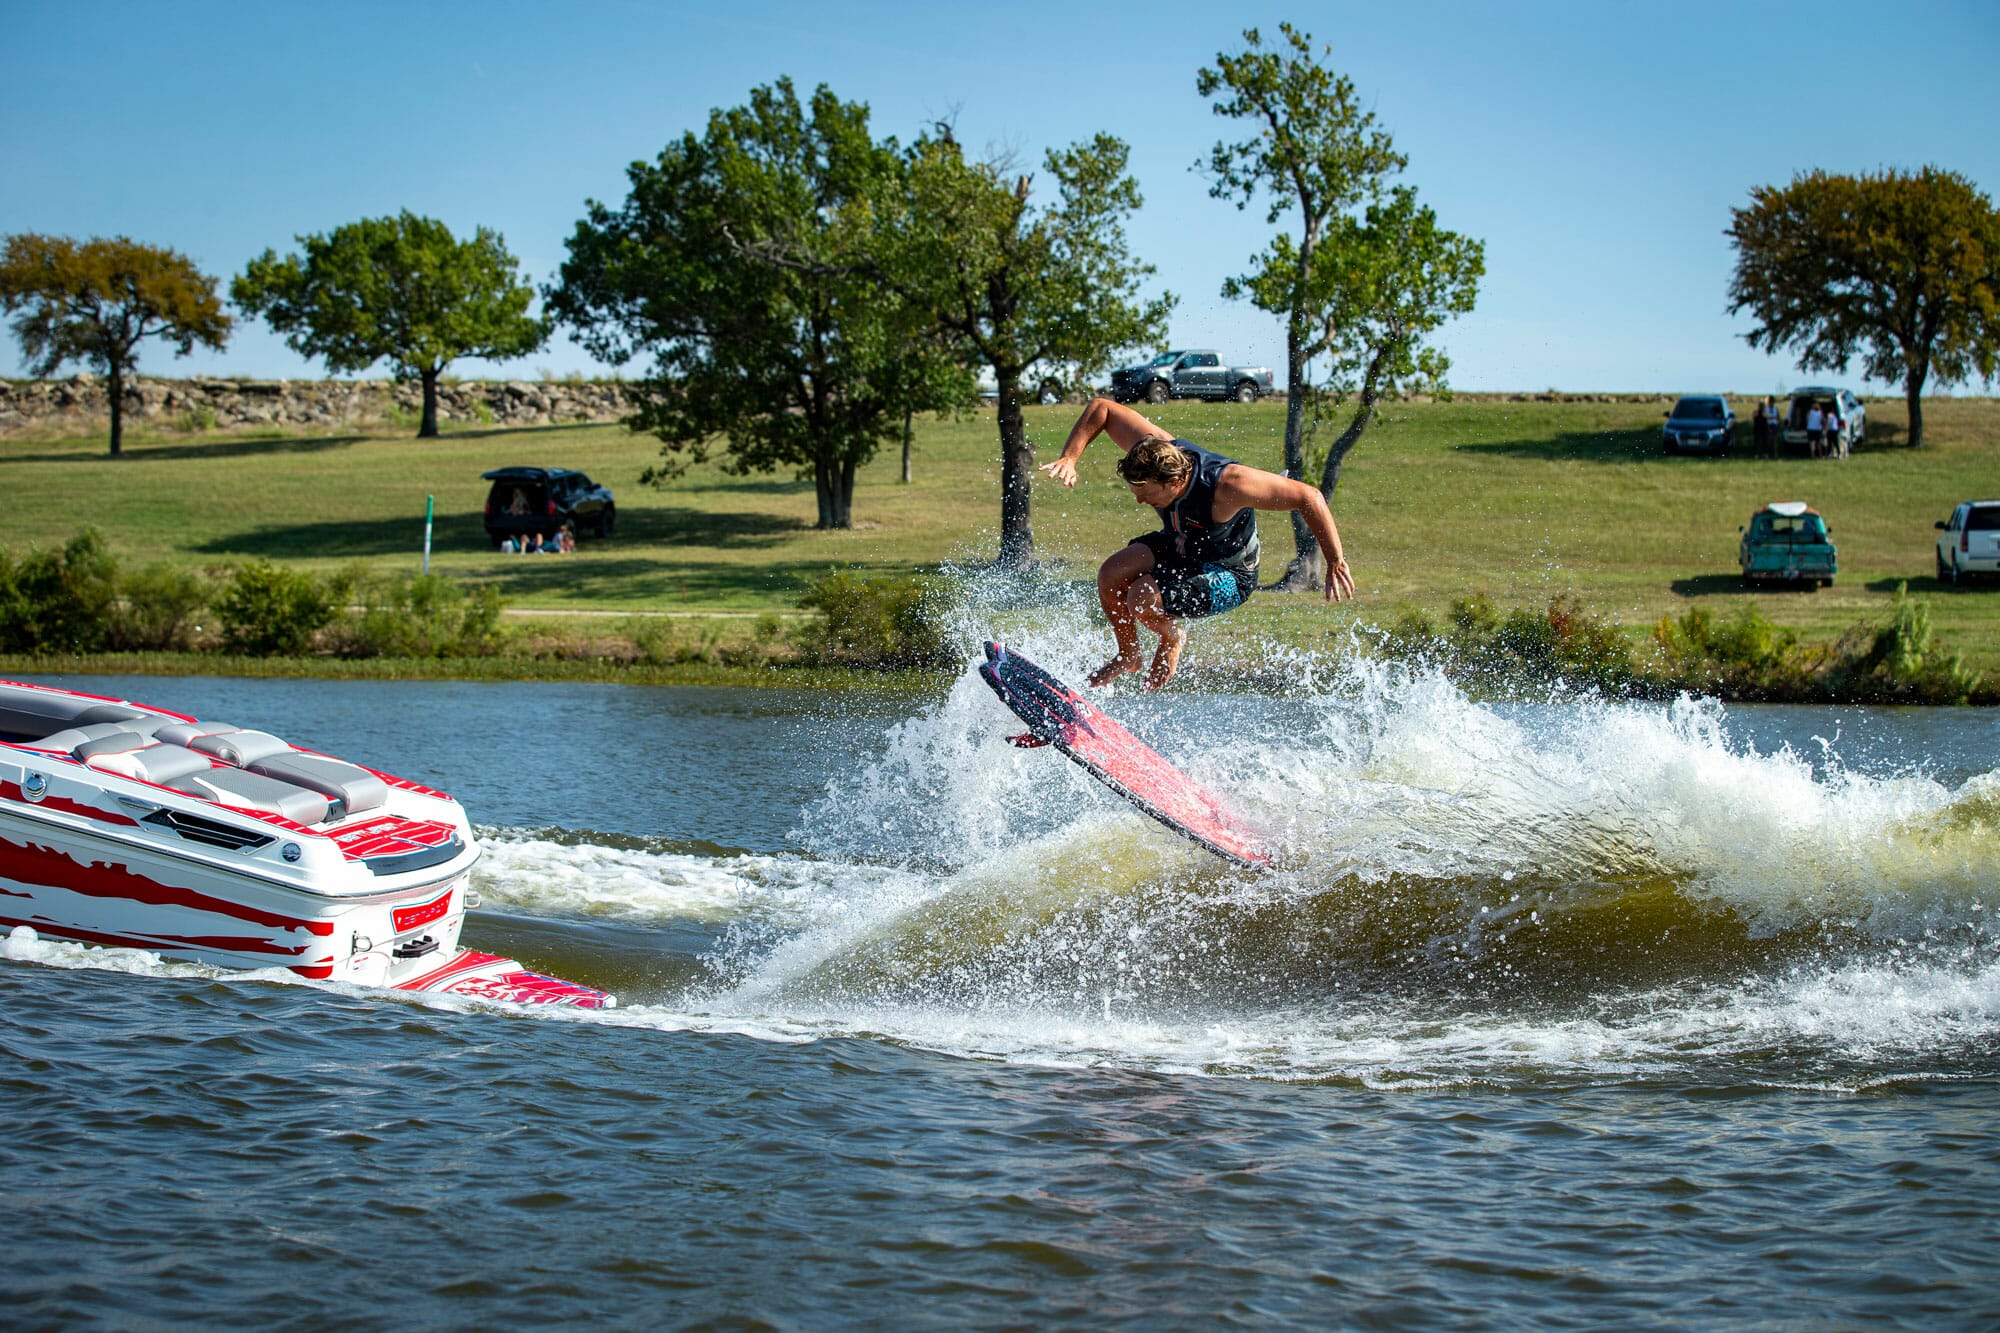 A man is wakesurfing behind a boat.